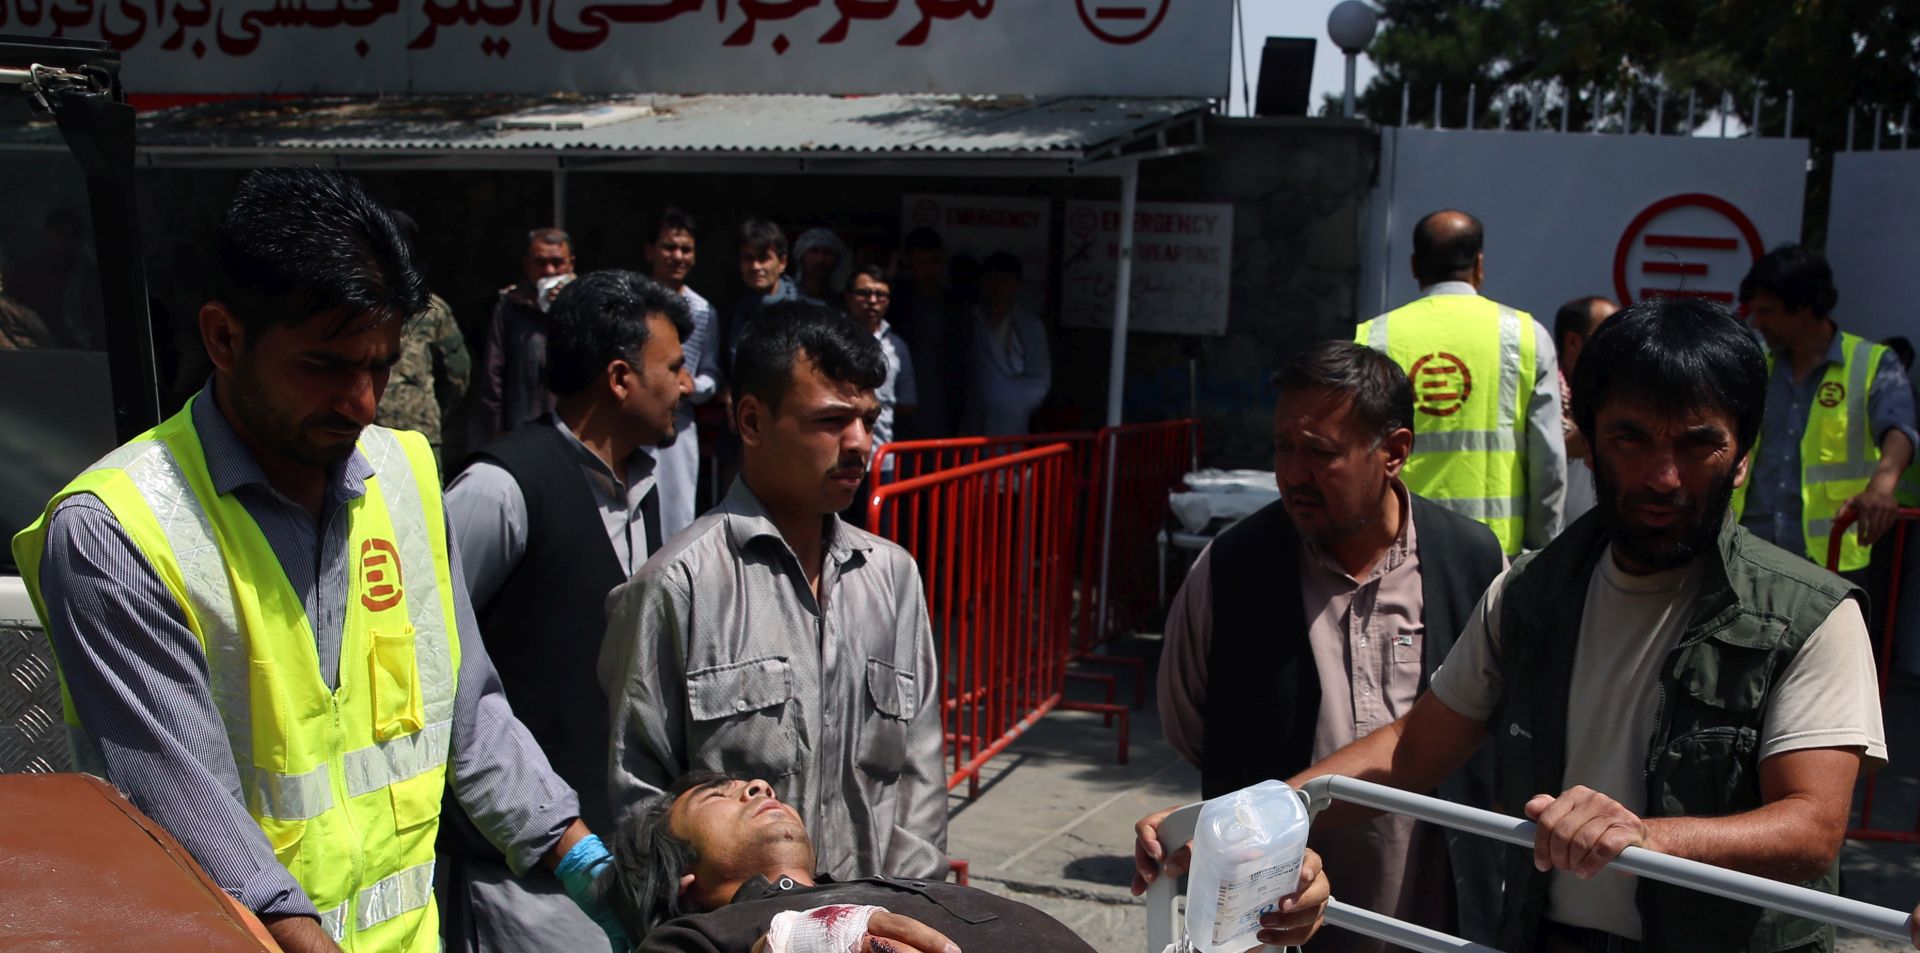 epa07759916 Afghan health workers transport a wounded man to a hospital after bomb explosion and gun fight that targeted a police station in a heavy residential area of Kabul, Afghanistan, 07 August 2019. According to reports, at least 95 people were wonded in the attack.  EPA/JAWAD JALALI